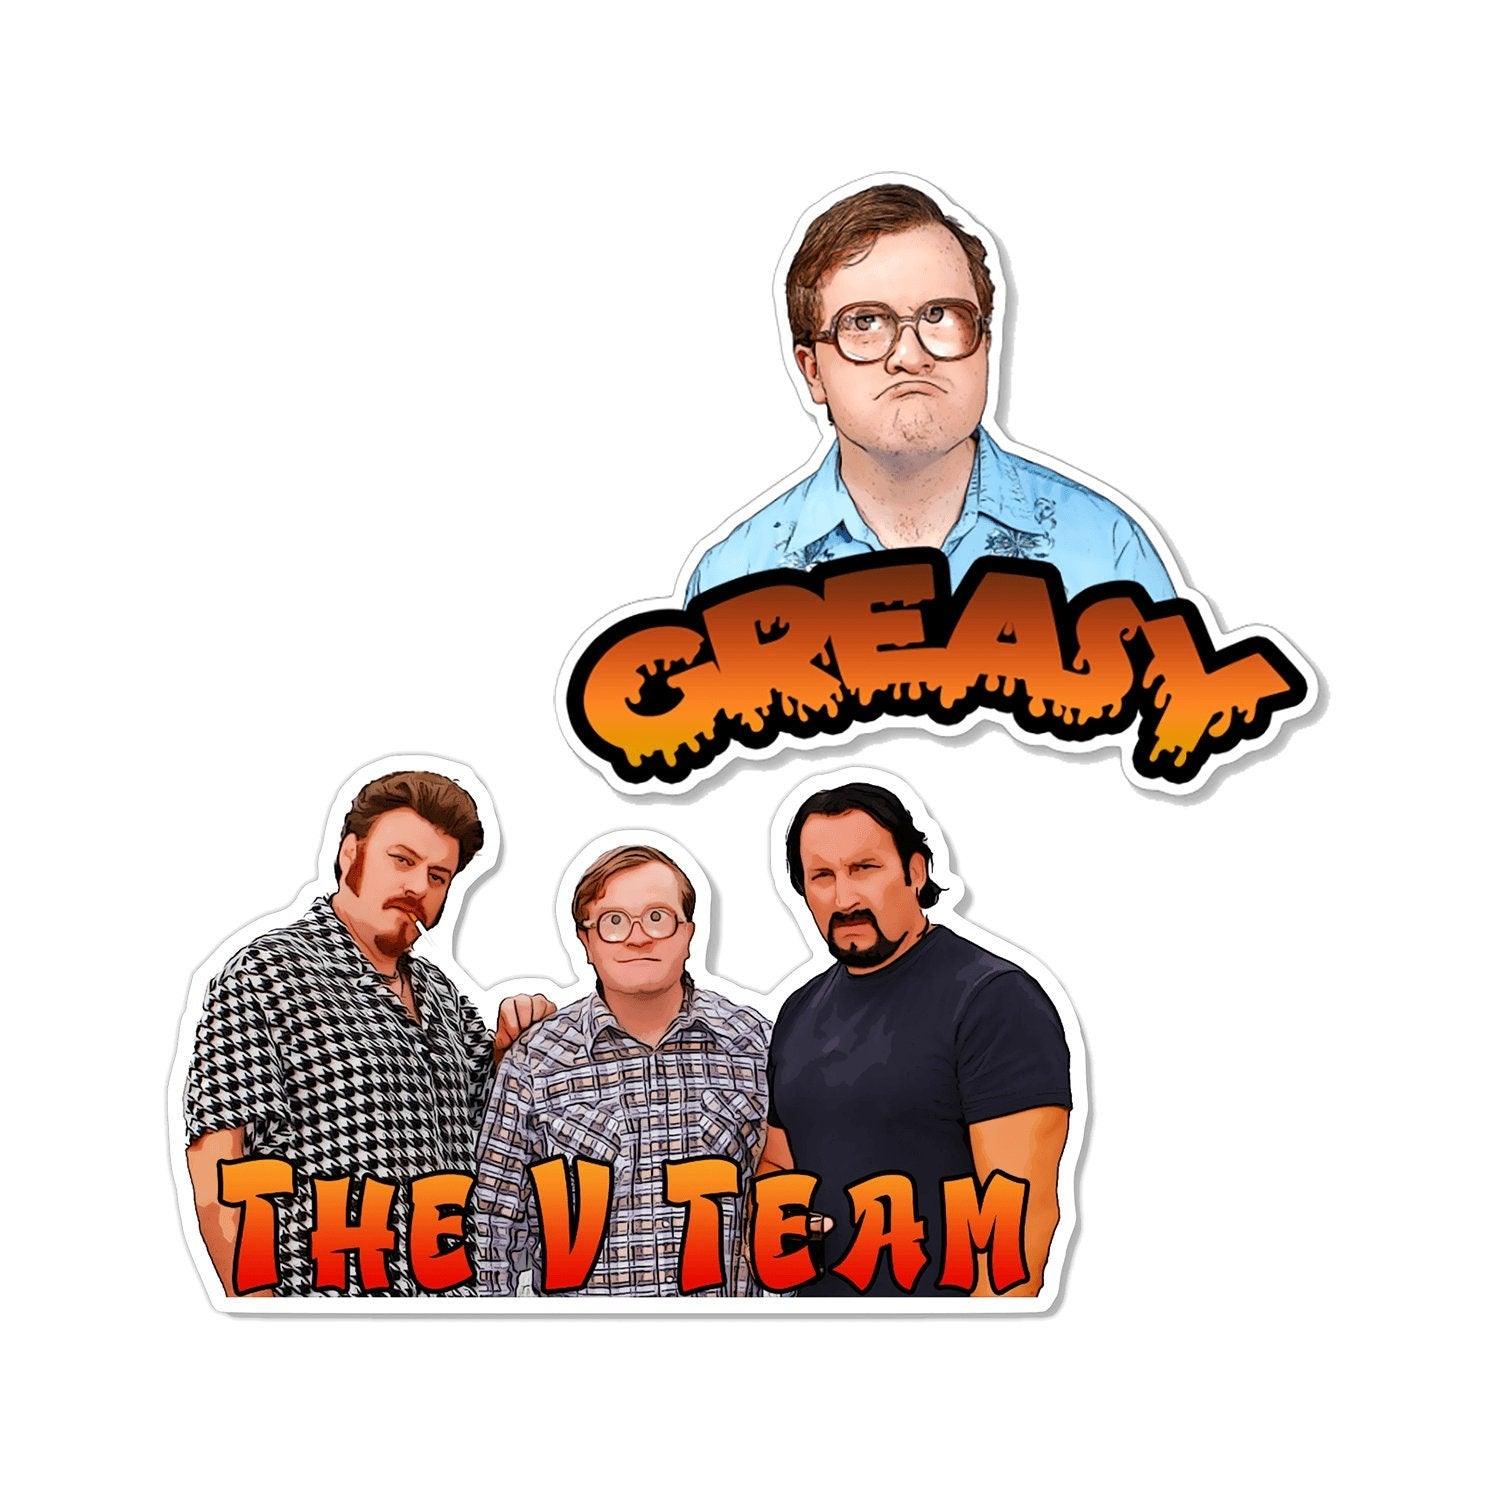 Trailer Park Boys Greasy Sticker Pack | Officially Licensed Stickers | Greasy and The V Team with Ricky Julian and Bubbles - Ottos Grotto :: Stickers For Your Stuff